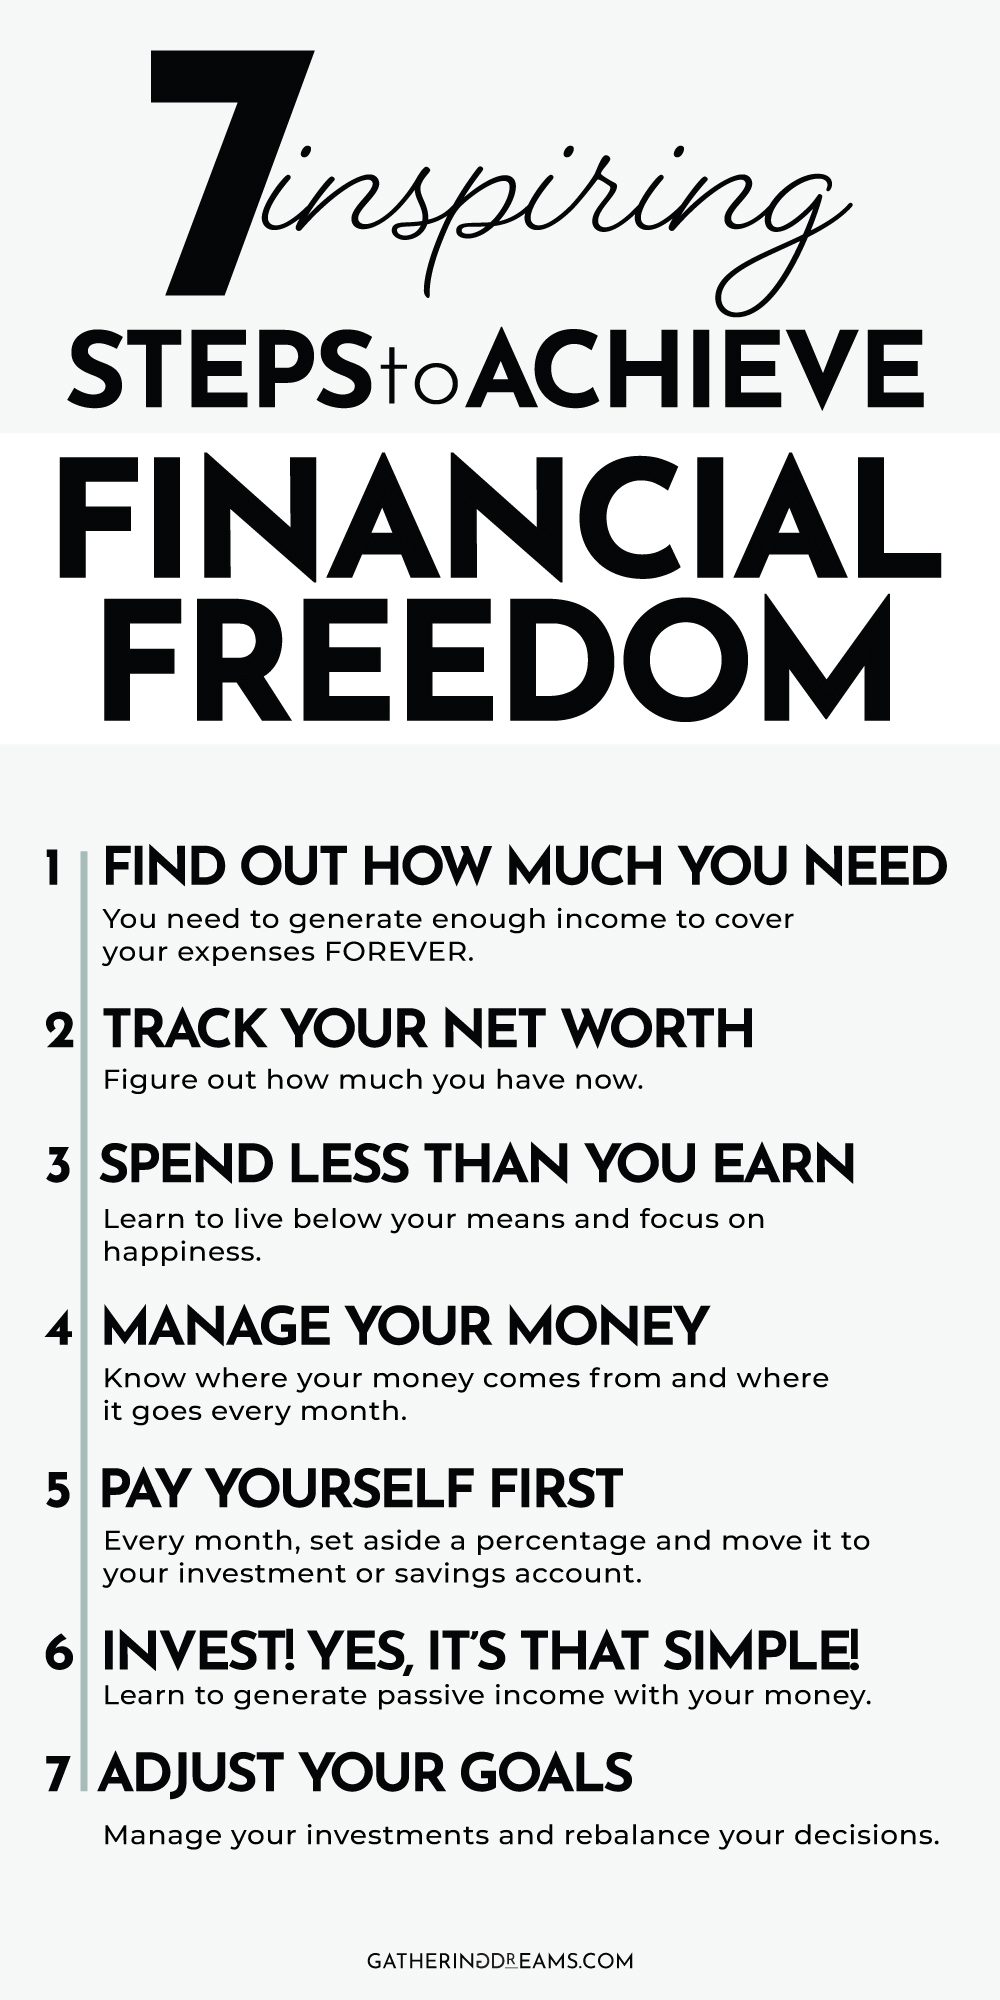 Infographic showing the 7 steps to reach financial freedom